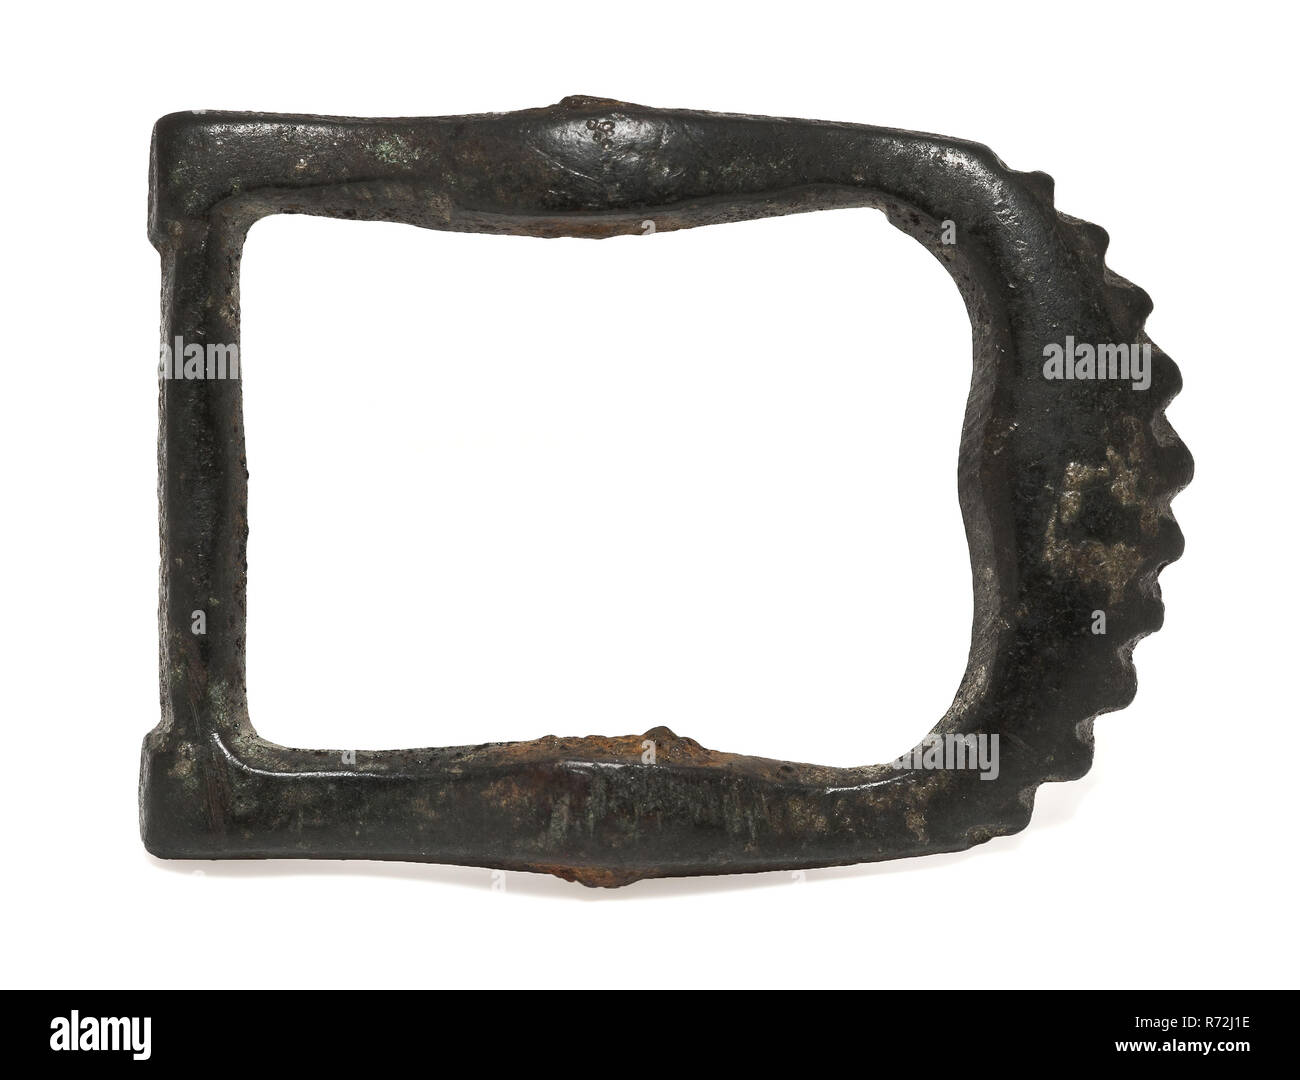 Brass buckle with serrated half-round side, buckle fastener part soil find copper brass metal, cast Copper buckle with serrated half round side. Rectangular model with thickening at the height of the middle post archeology Rotterdam rail tunnel attaching clinging up the footwear Soil discovery: trajectory Rotterdam rail tunnel. Stock Photo